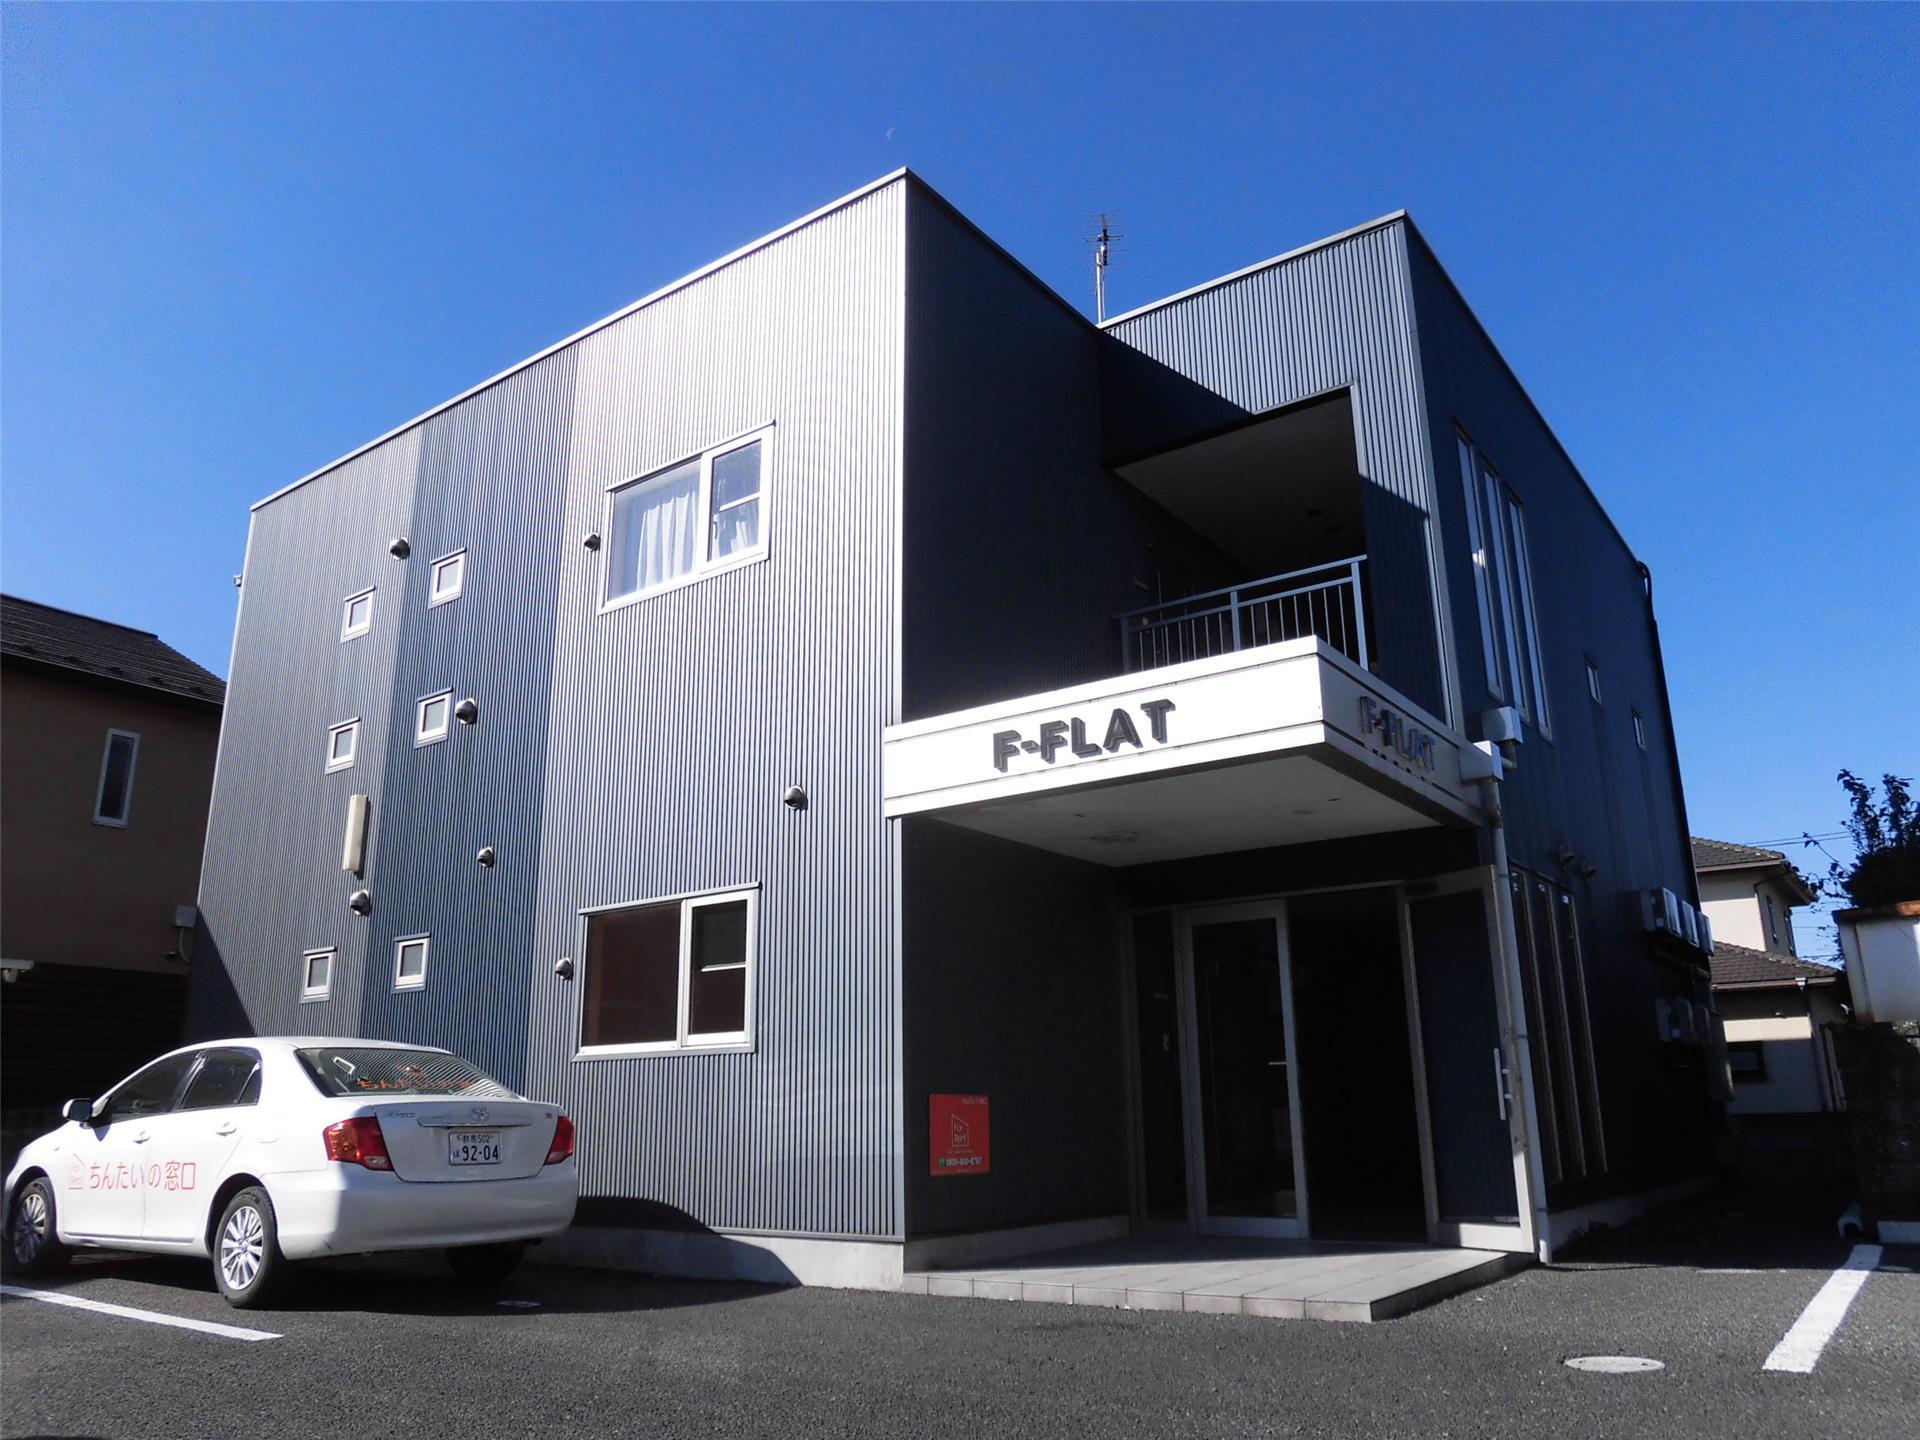 Ｆ・ＦＬＡＴの建物外観